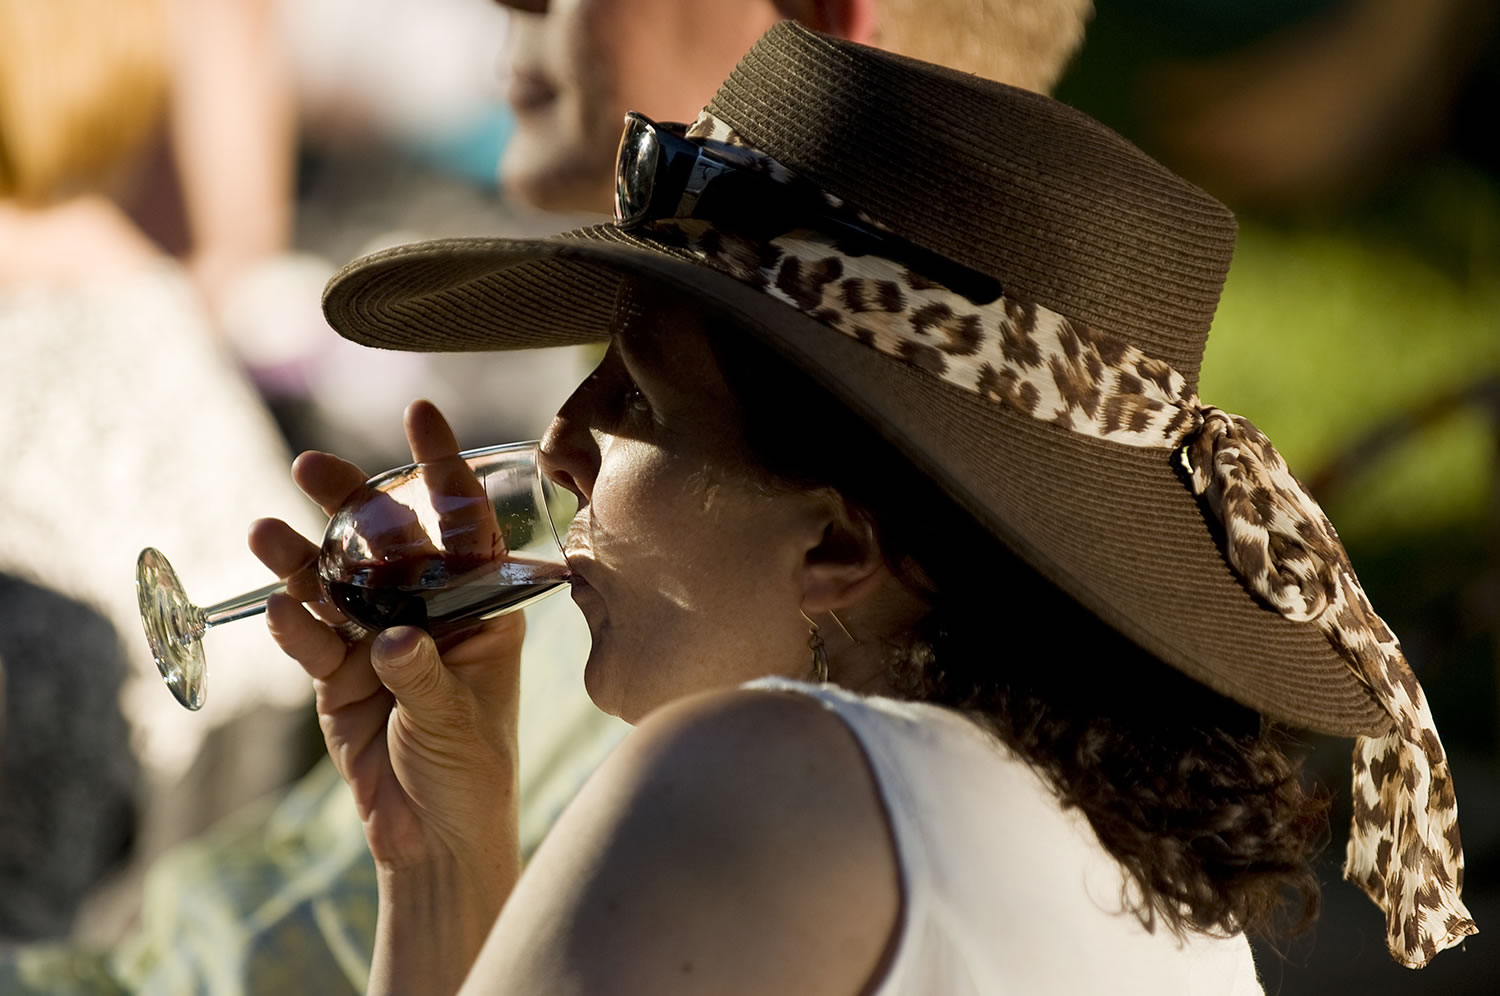 A woman sips wine on the opening night of the 2011 Vancouver Wine and Jazz Festival at Esther Short Park.